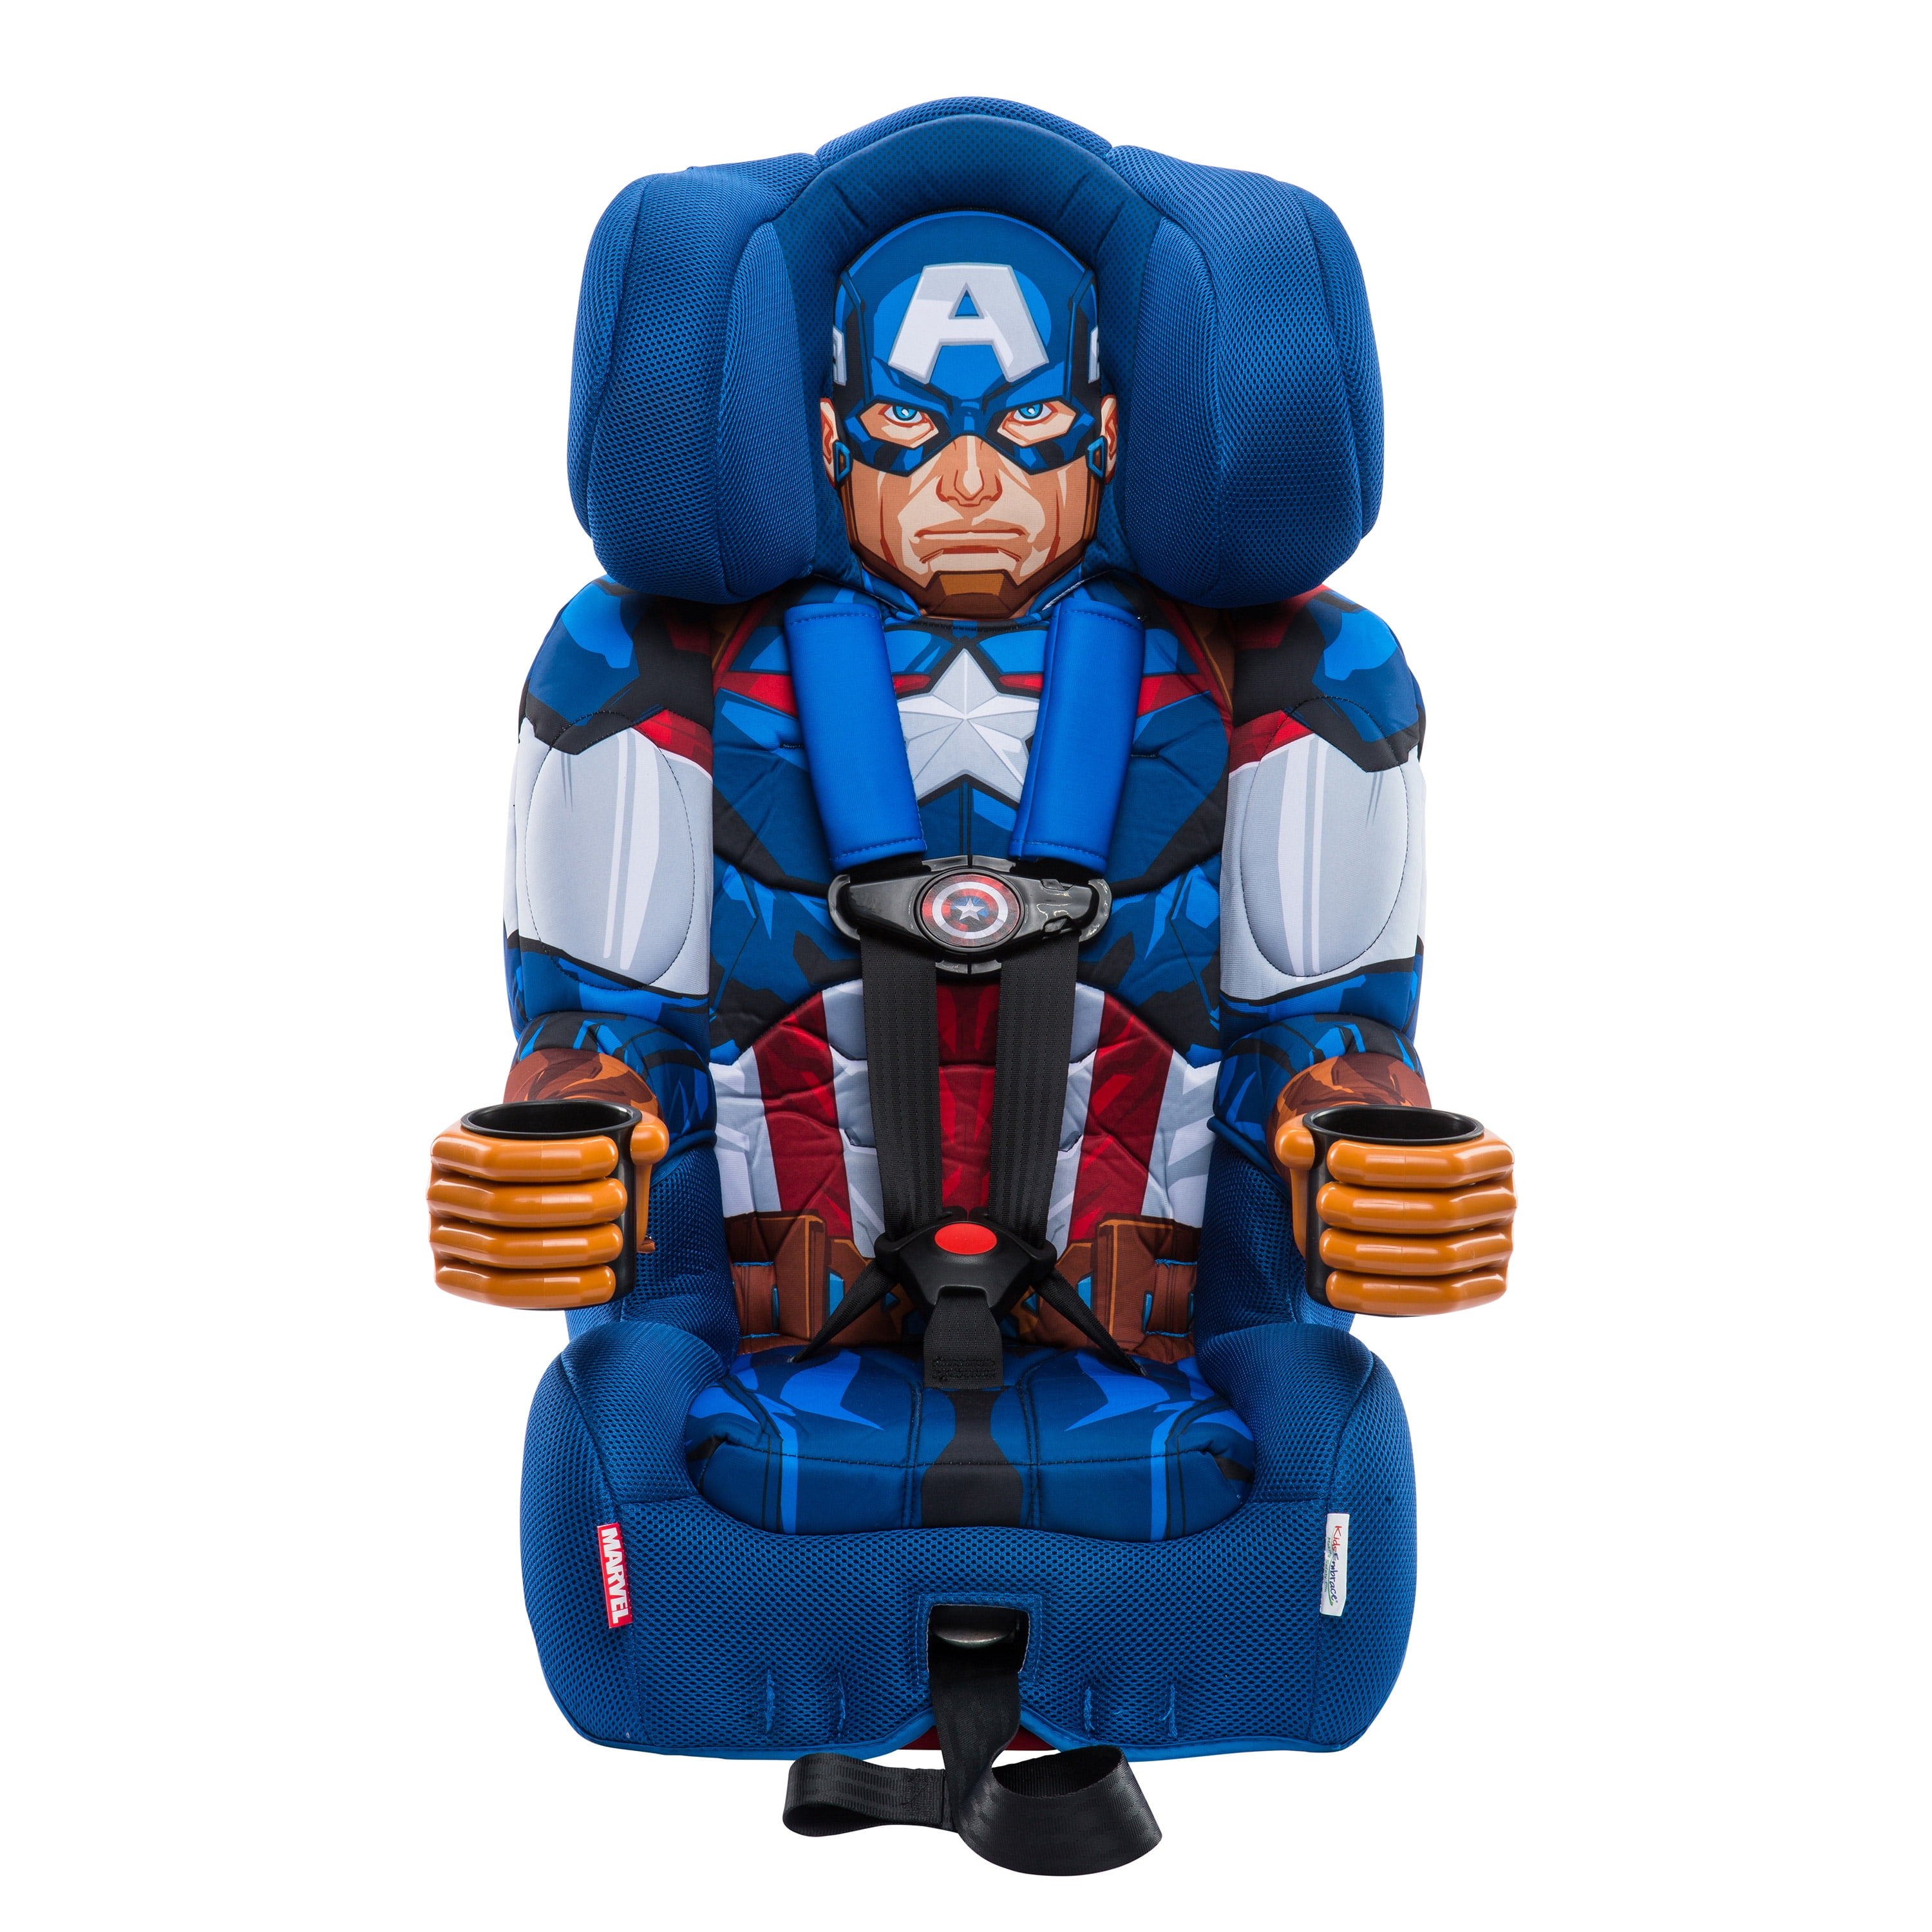 Marvel ® CAPITAN AMERICA Childs Car Booster Seat Group 2/3 Q19 15-36 kgs 